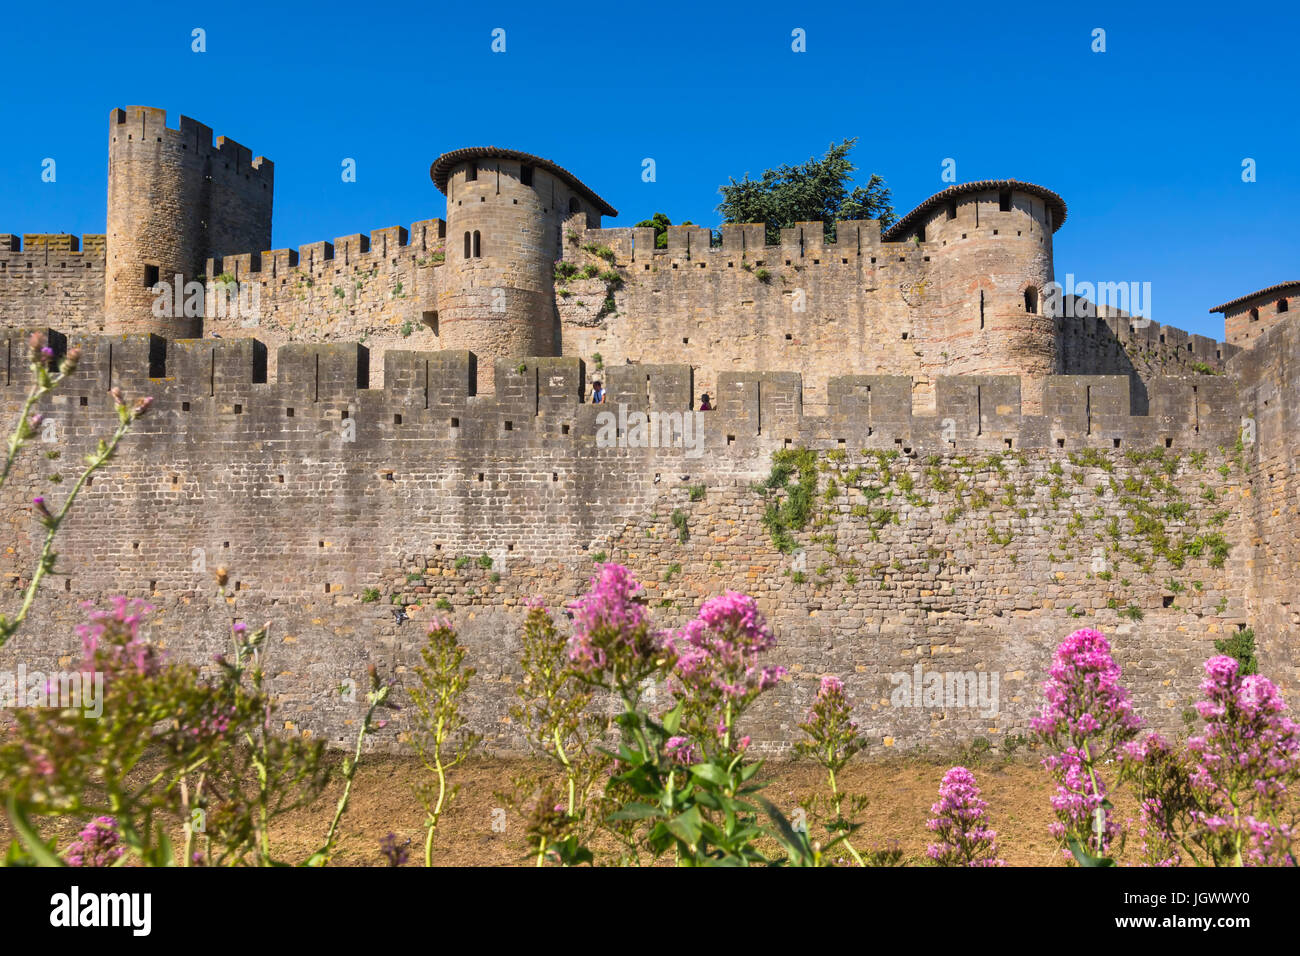 Carcassonne, Languedoc-Roussillon, France.  Walls, towers and ramparts of the the Cite de Carcassonne which is a UNESCO World Heritage Site. Stock Photo